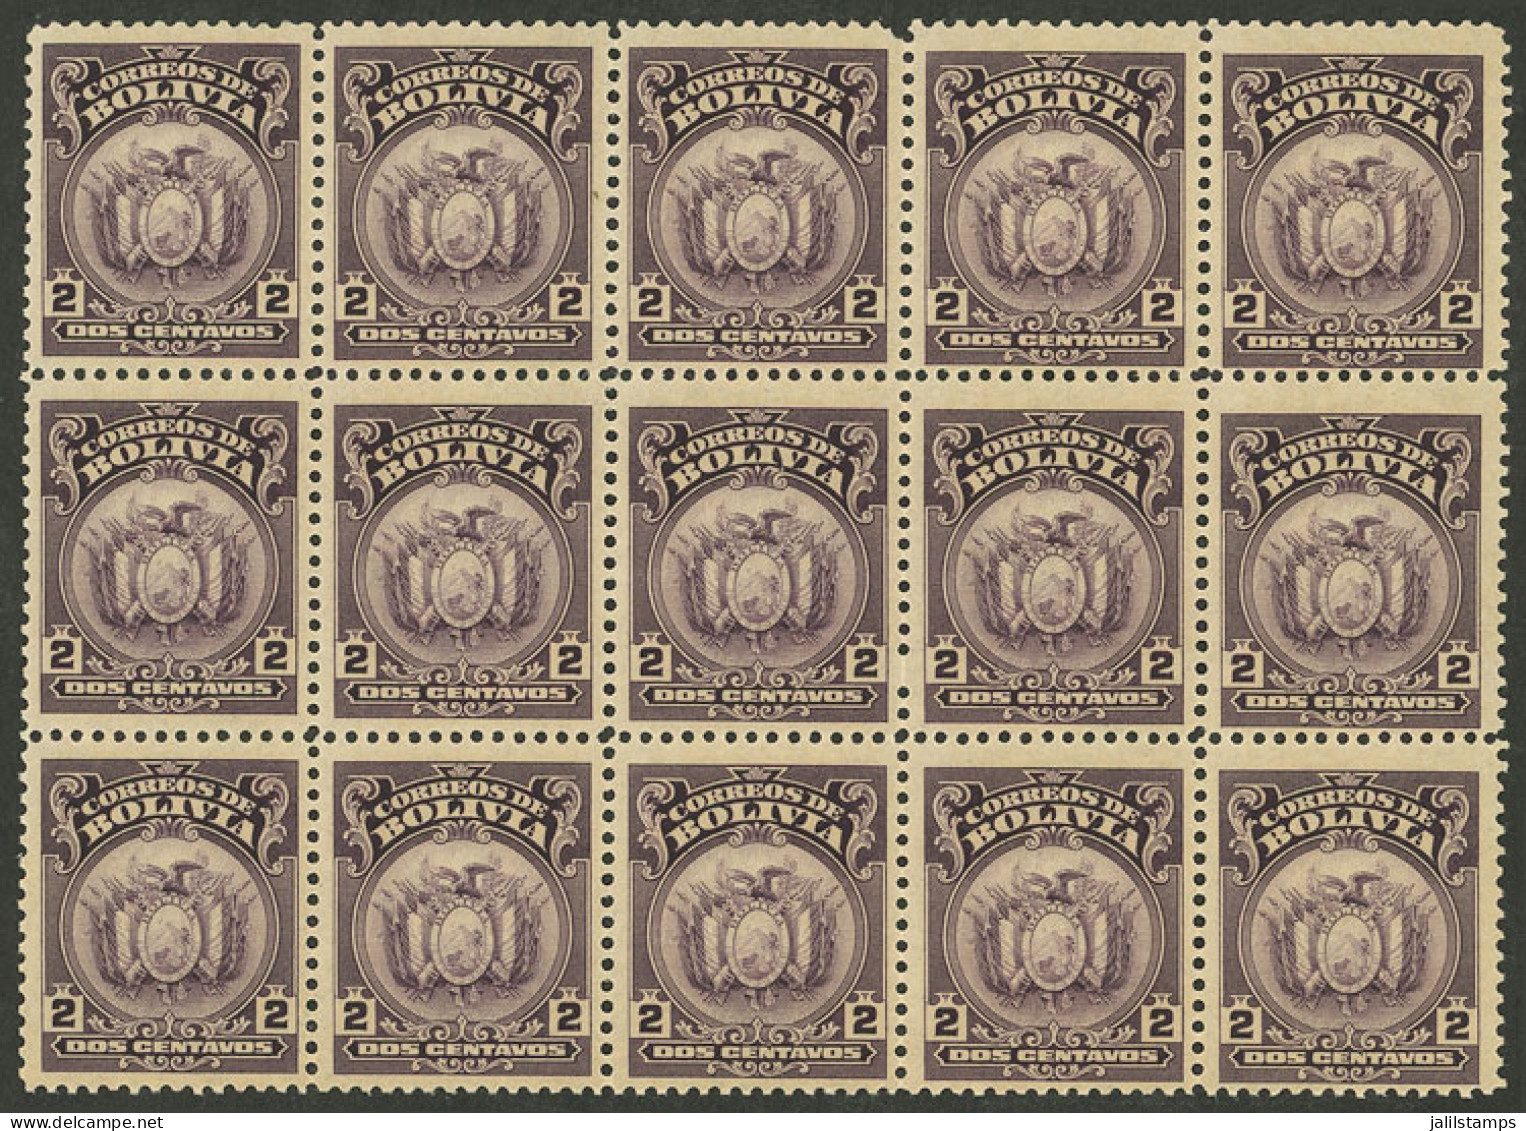 BOLIVIA: Yvert 112A (Sc.119), 1919 Coat Of Arms 2c. Violet Printed By American Bank Note Co., Beautiful MNH Block Of 15, - Bolivien